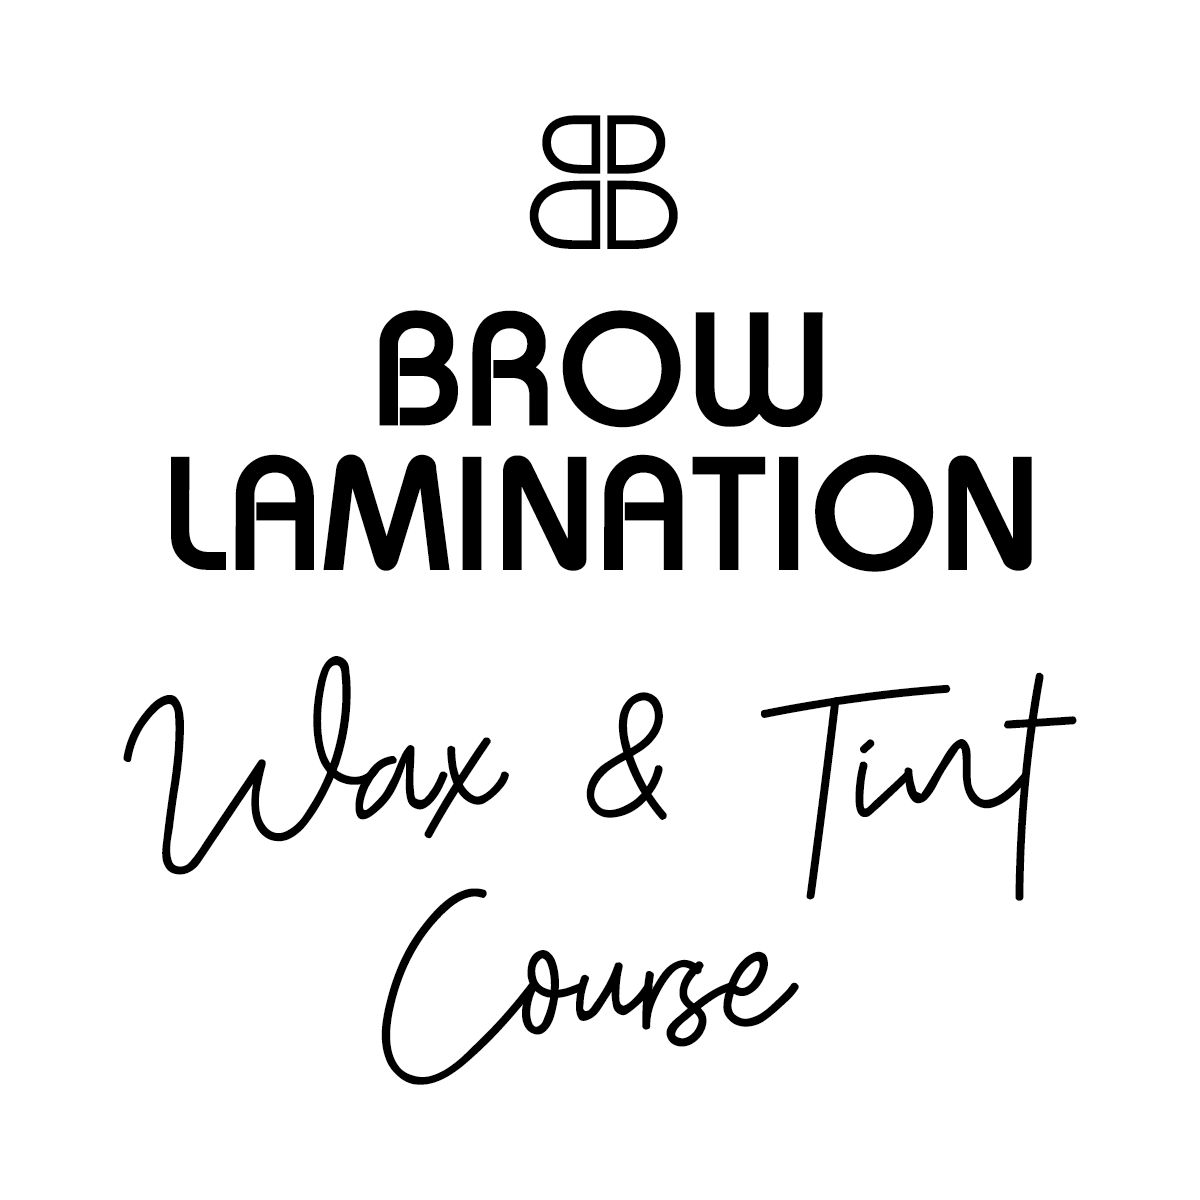 Brow Lamination, Waxing and Tinting Course